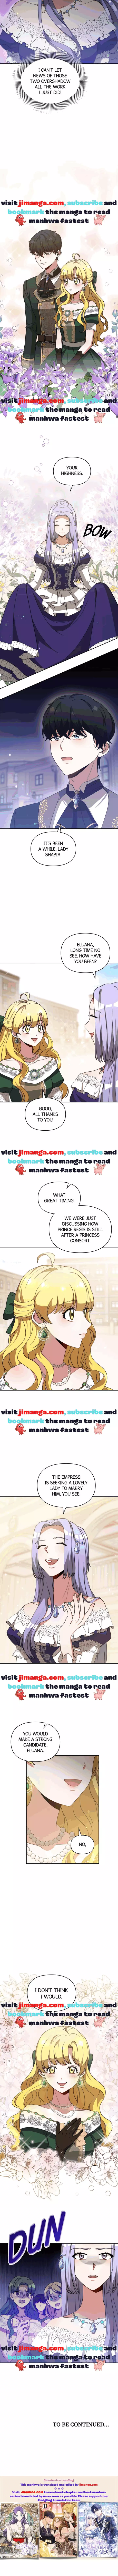 The Forgotten Princess Wants To Live In Peace - 59.5 page 5-8060119e